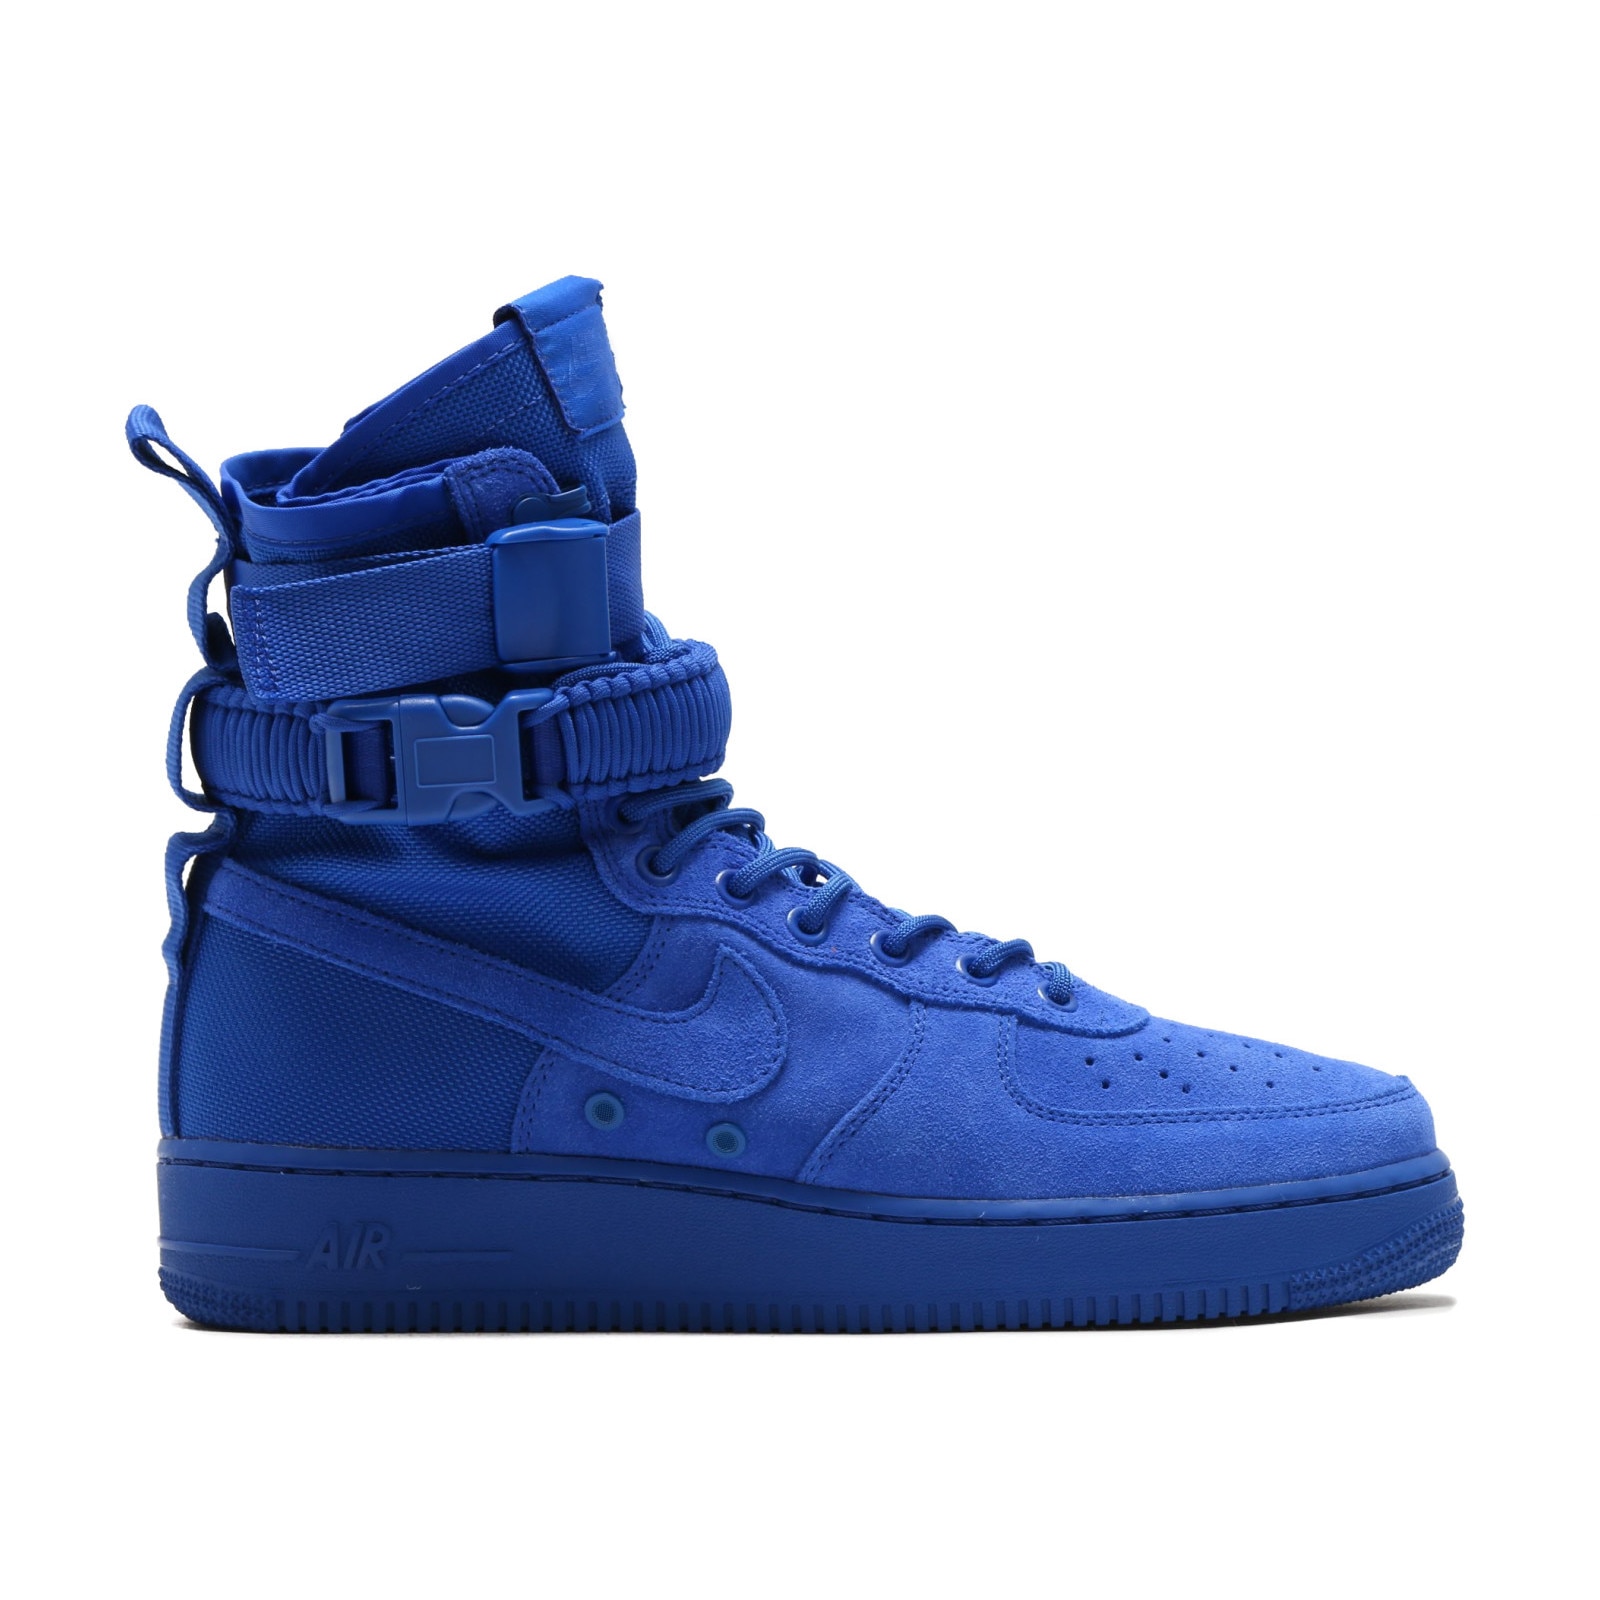 Nike Special Field Air Force Game Royal albastrii, 42.5 -